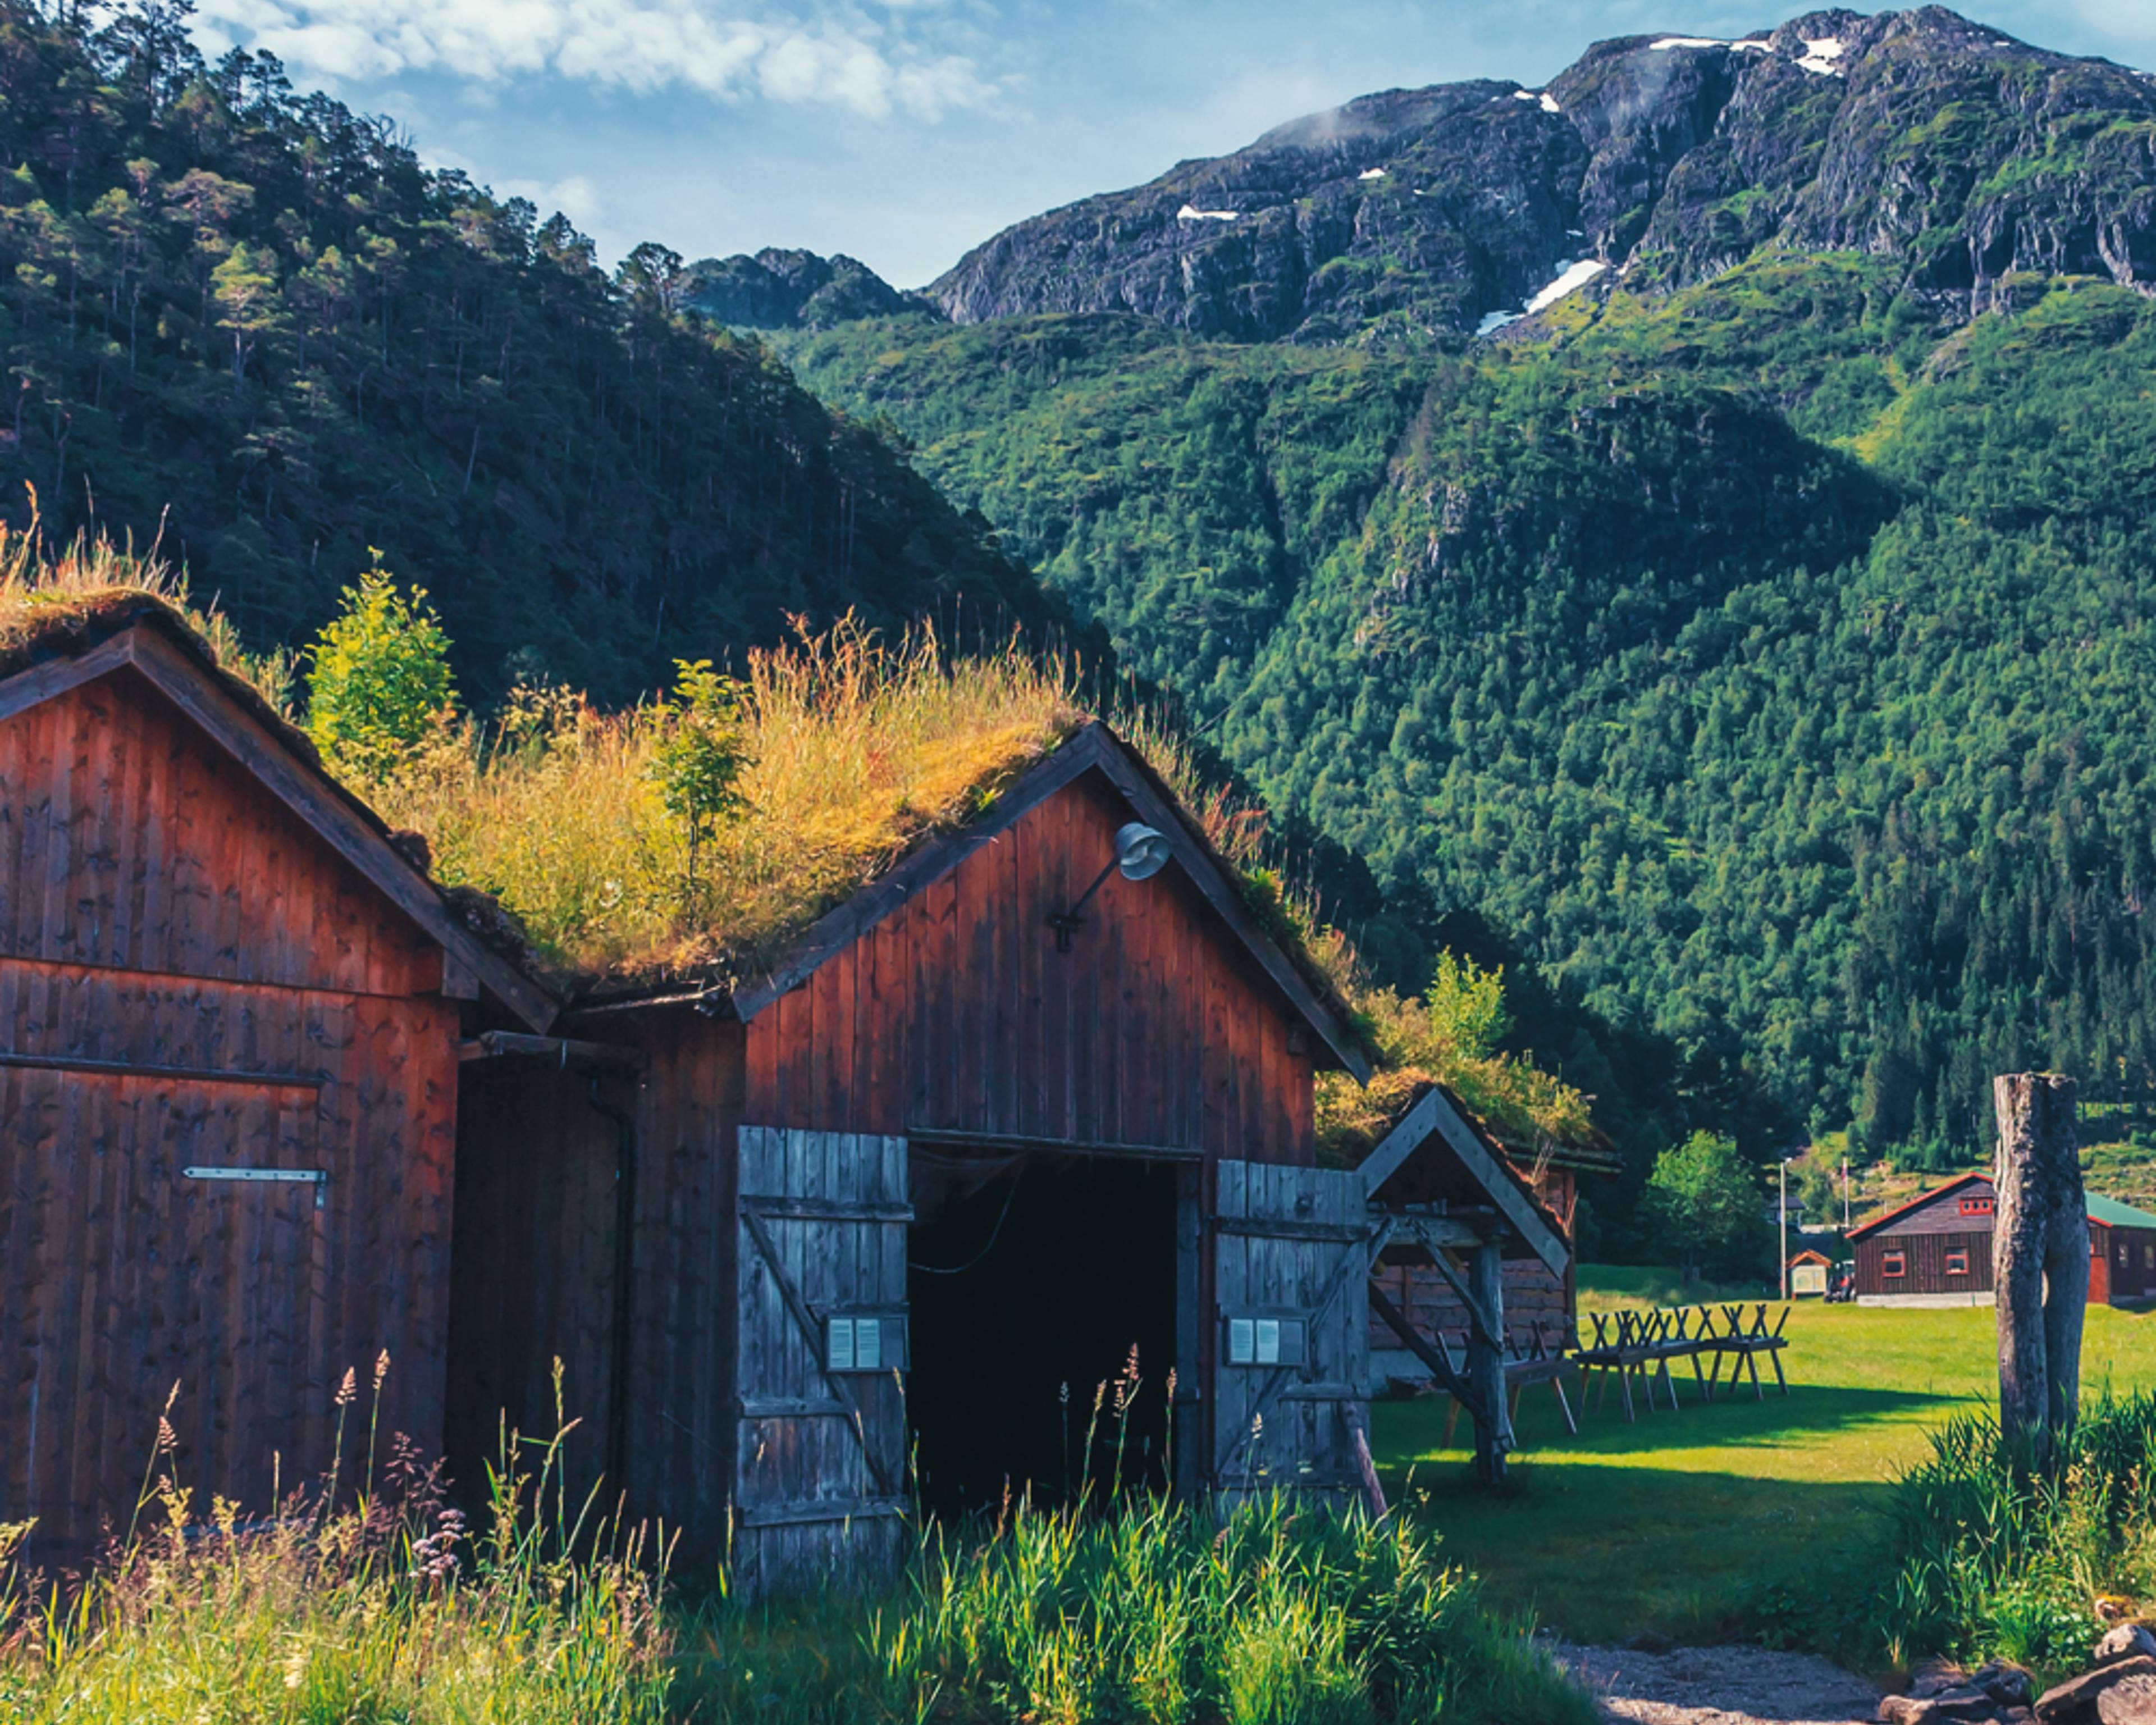 History Tours in Norway | Norway's Best Historical Sites